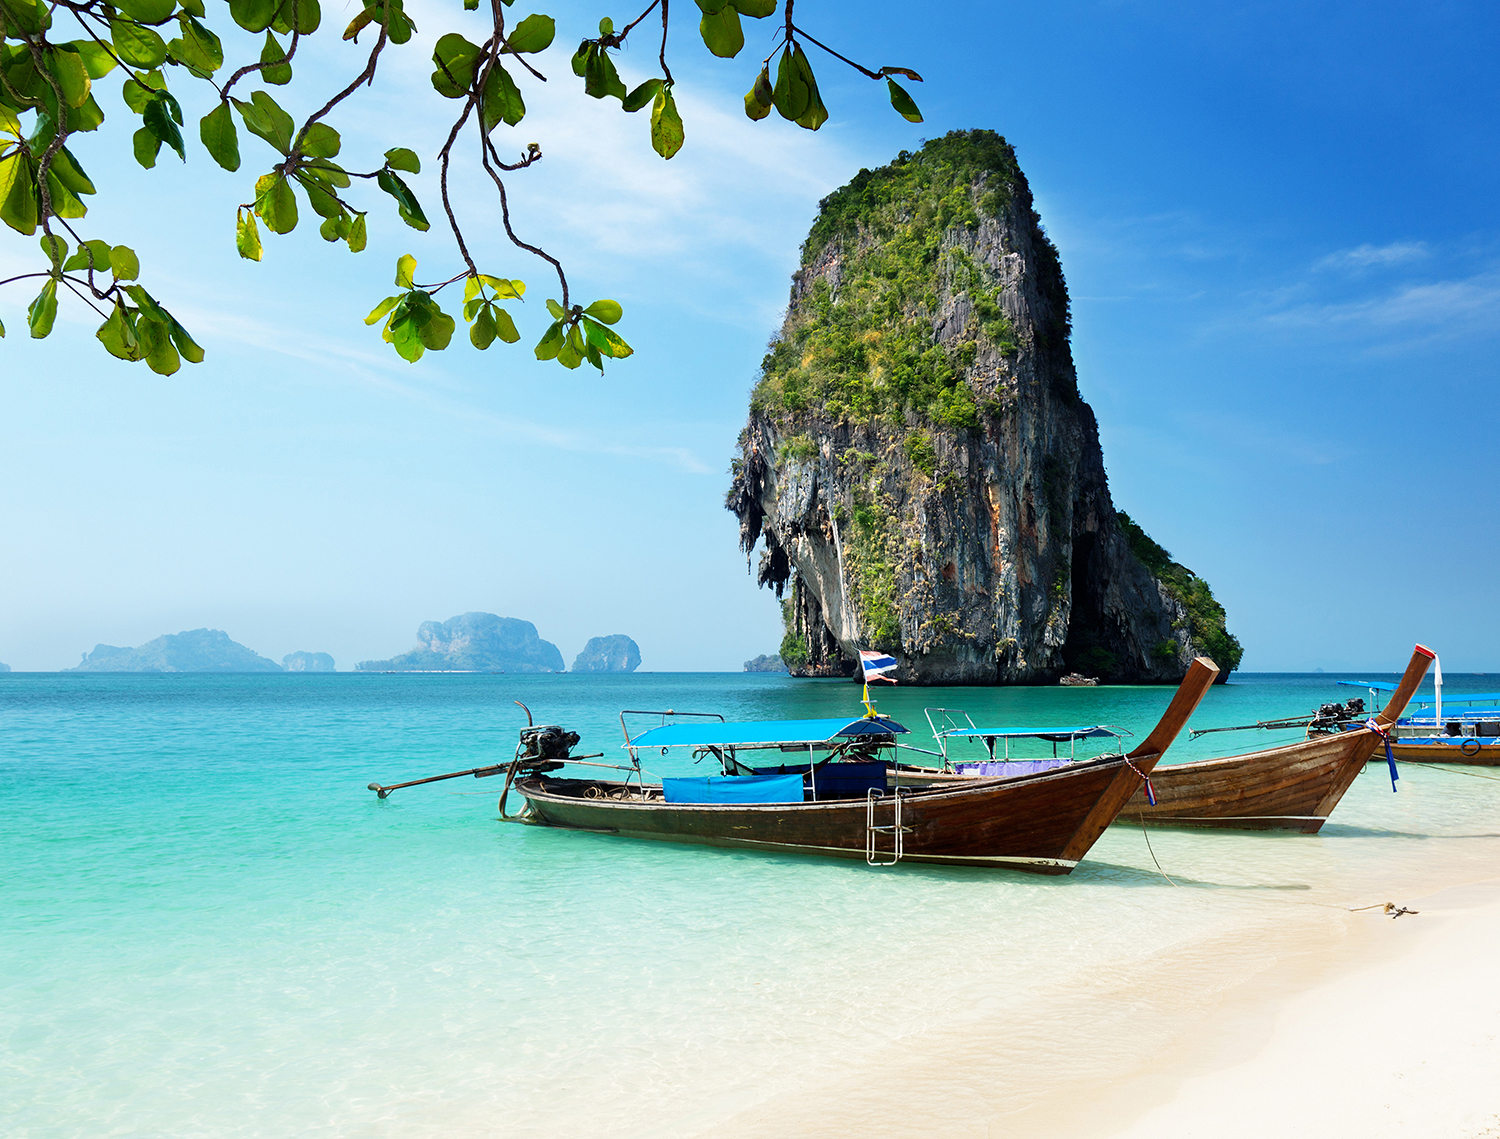 The Islands of Thailand